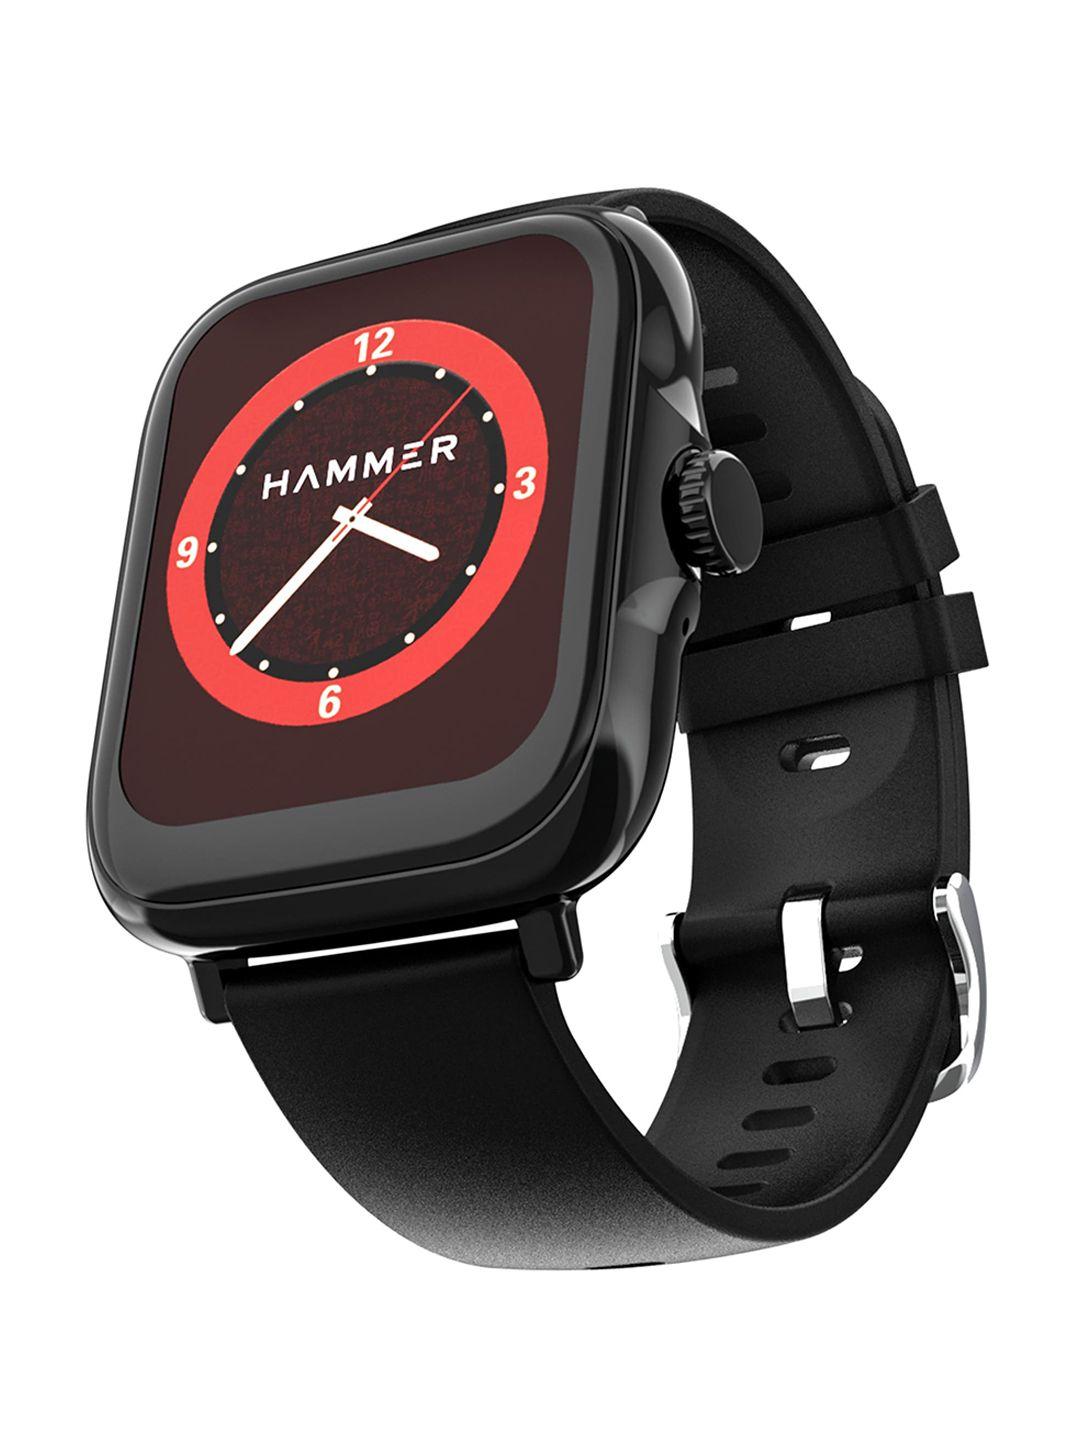 hammer ace 4.0 calling smart watch with large 1.85 inch ips display (black)